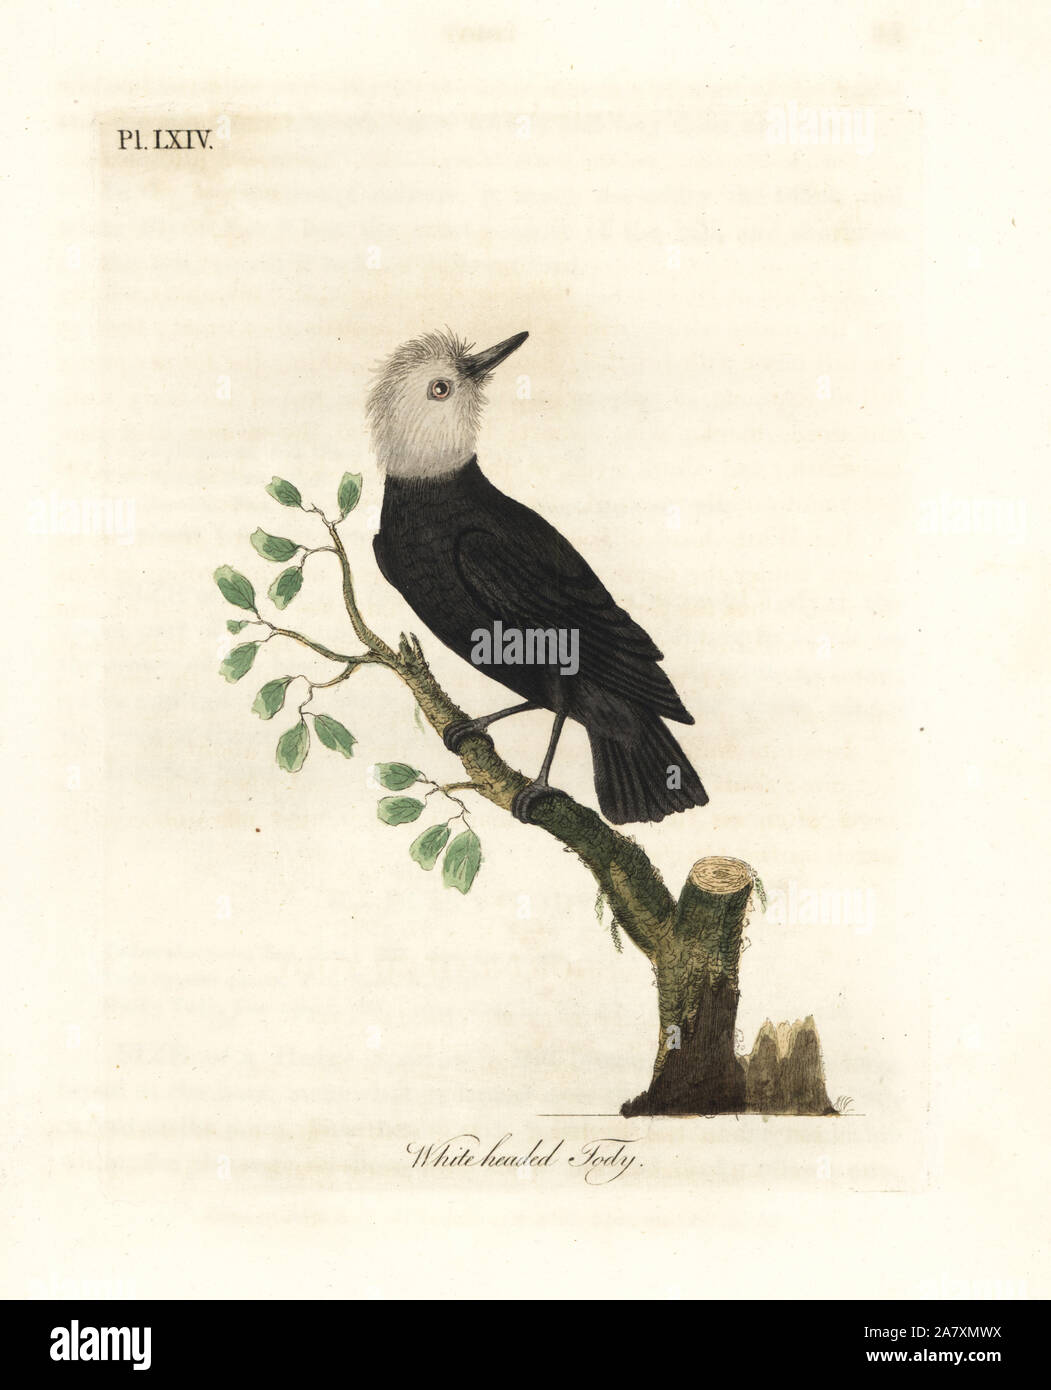 White-headed marsh tyrant, Arundinicola leucocephala (White-headed tody, Todus leucocephalus). Handcoloured copperplate drawn and engraved by John Latham from his own A General History of Birds, Winchester, 1822. Stock Photo